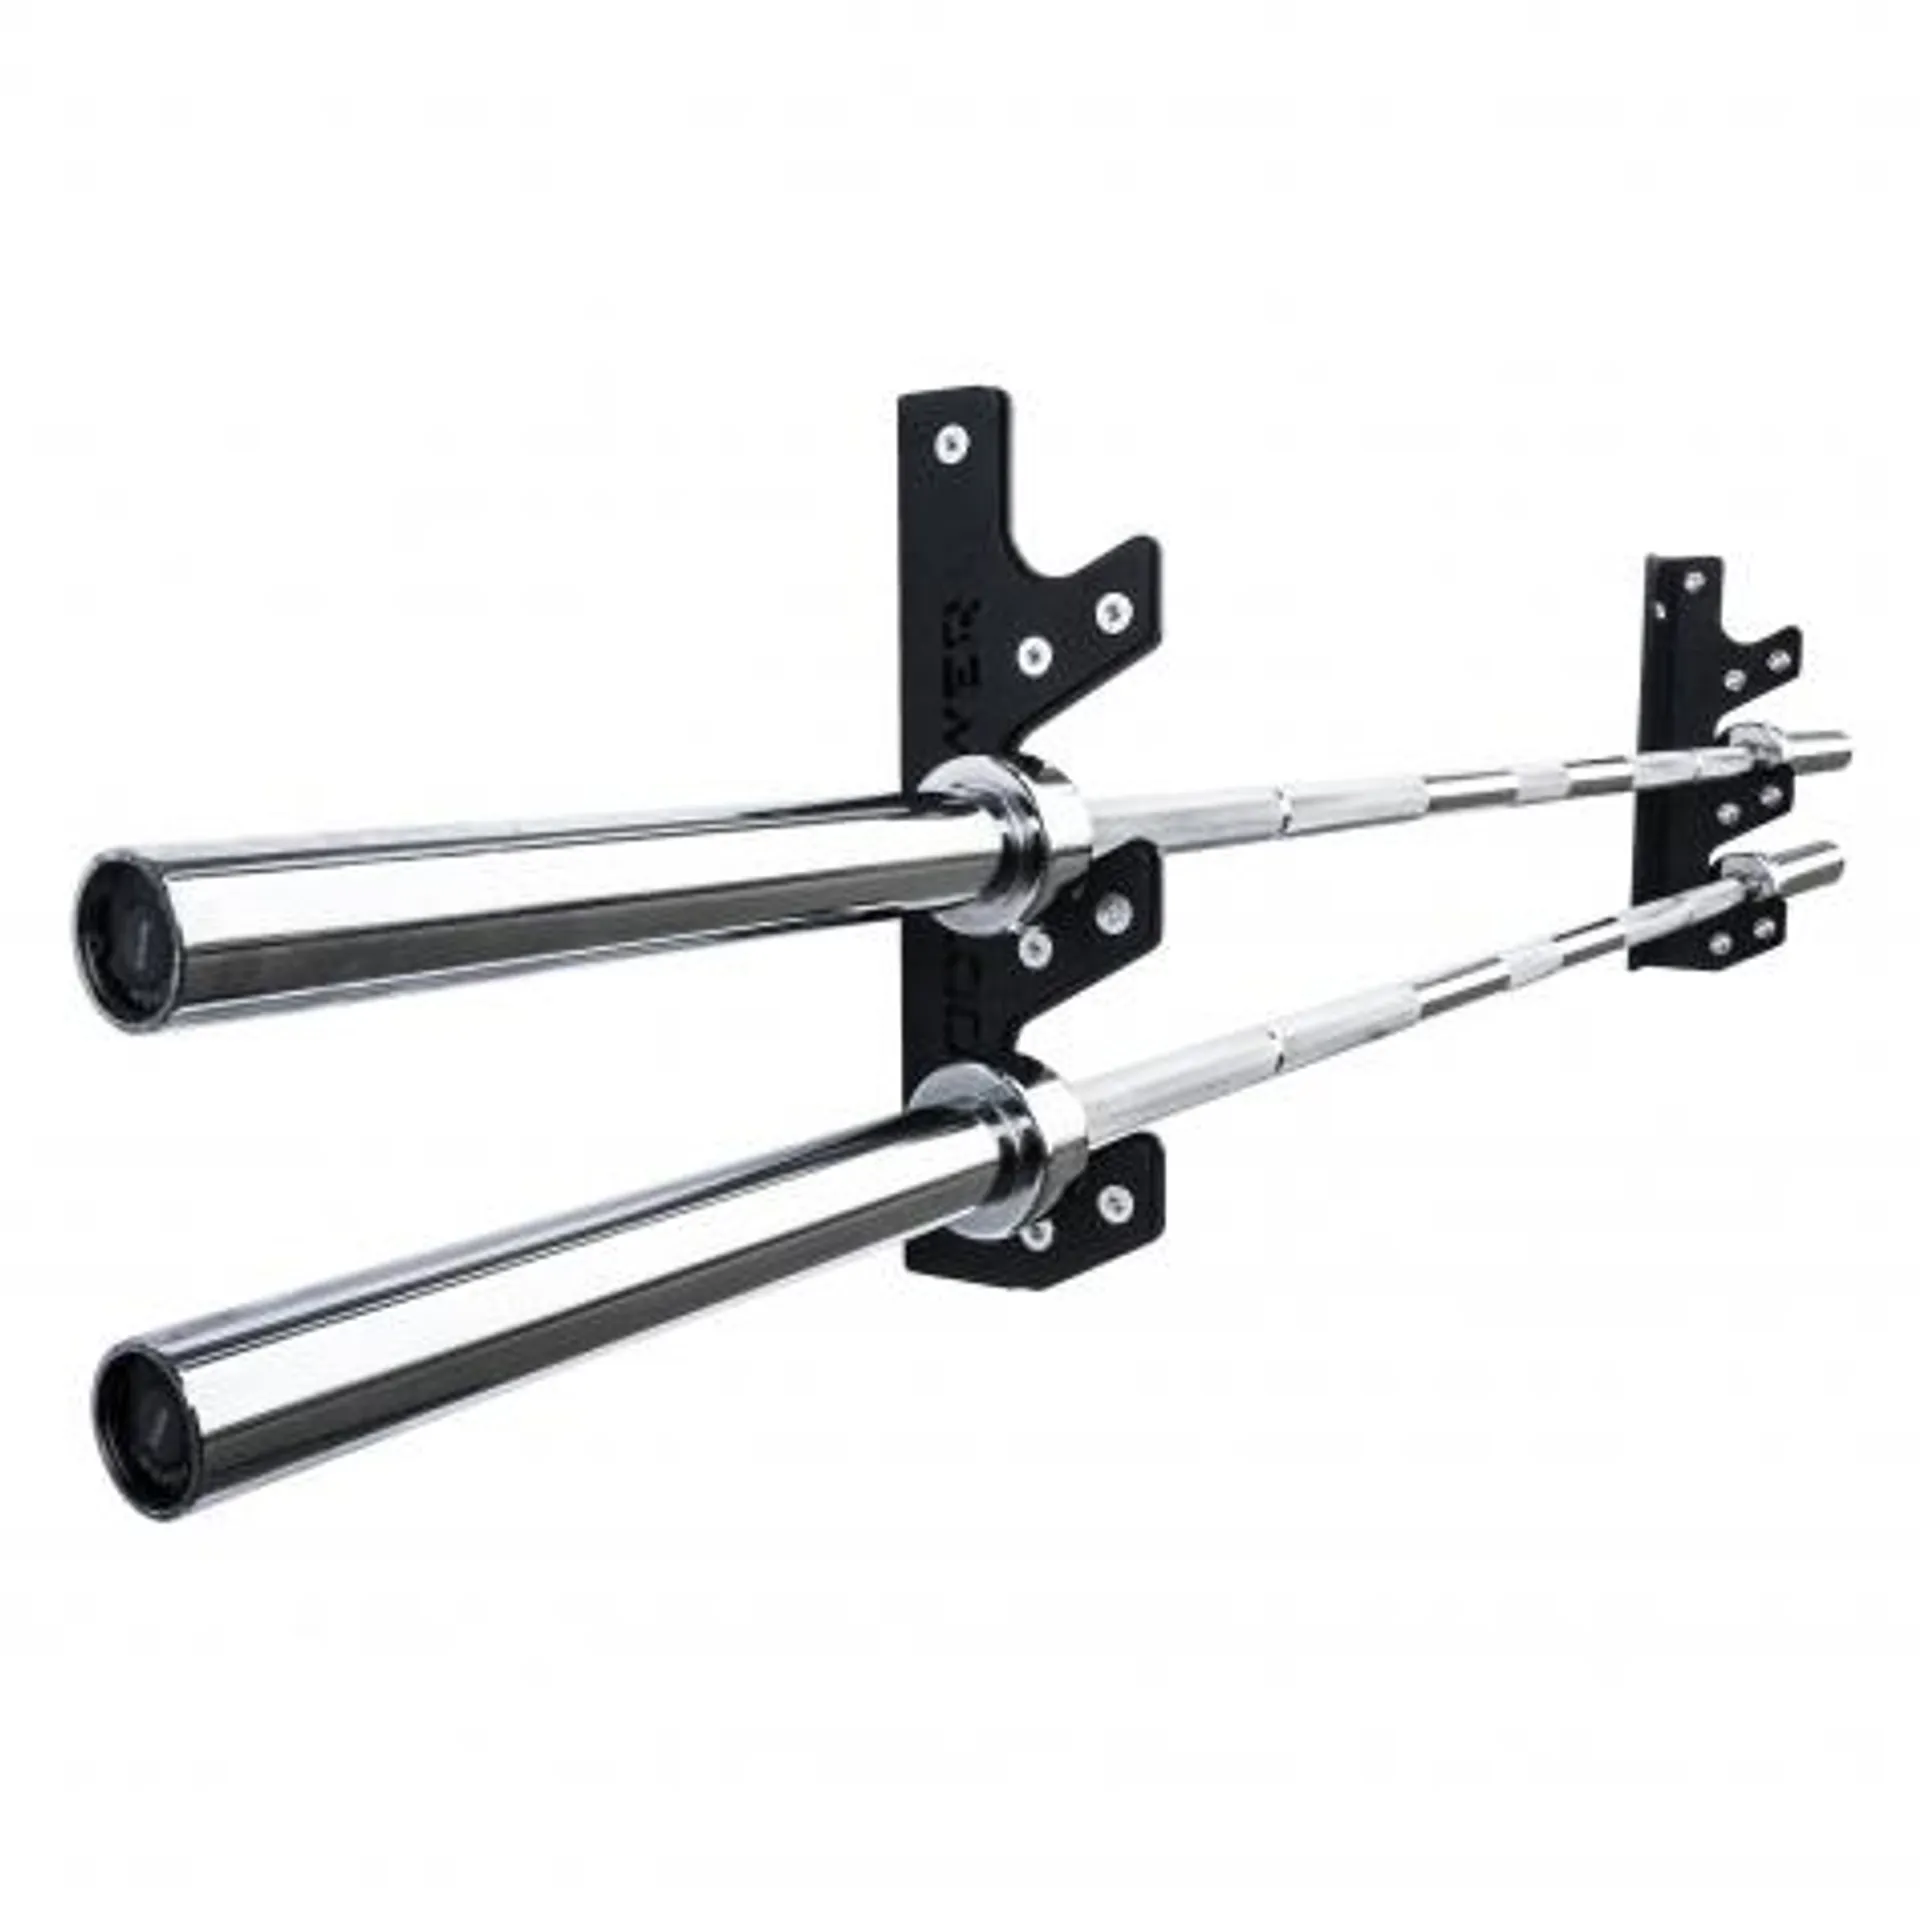 Body Power Wall Mounted Barbell Rack - Stores 3 Bars